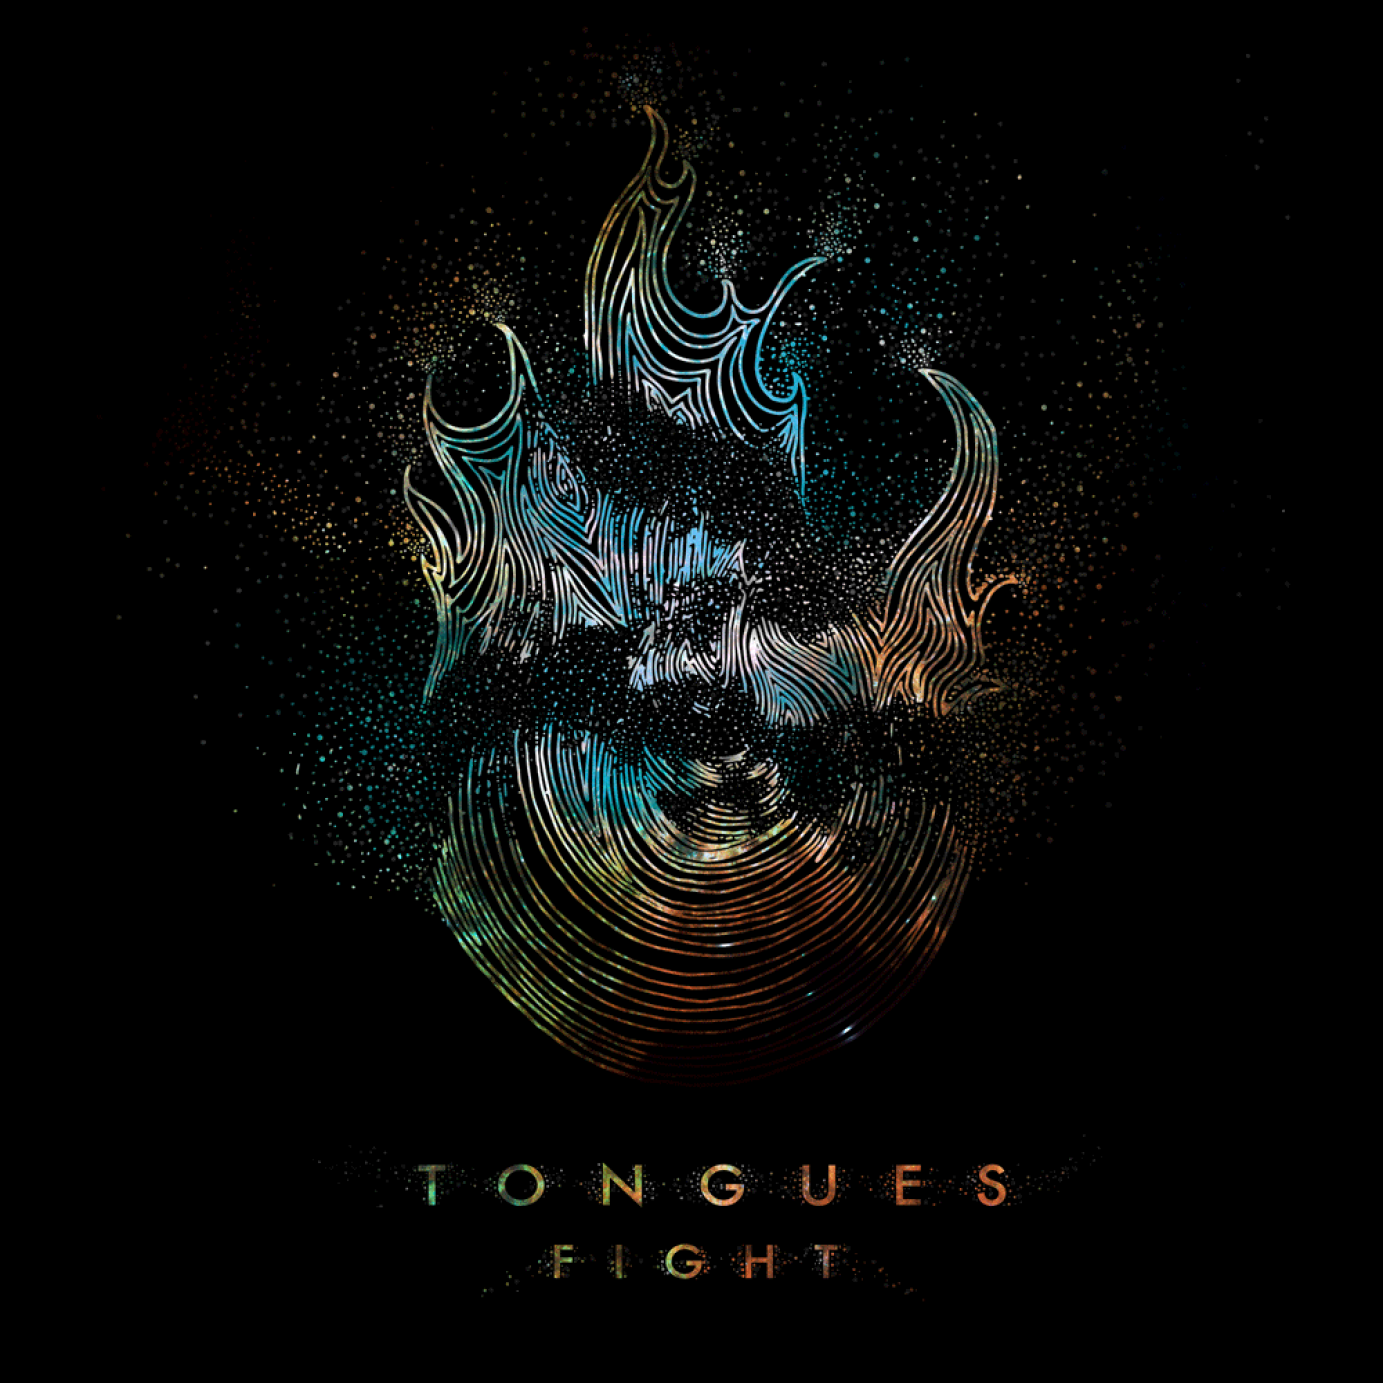 Artwork for Tongues. by helenlucy